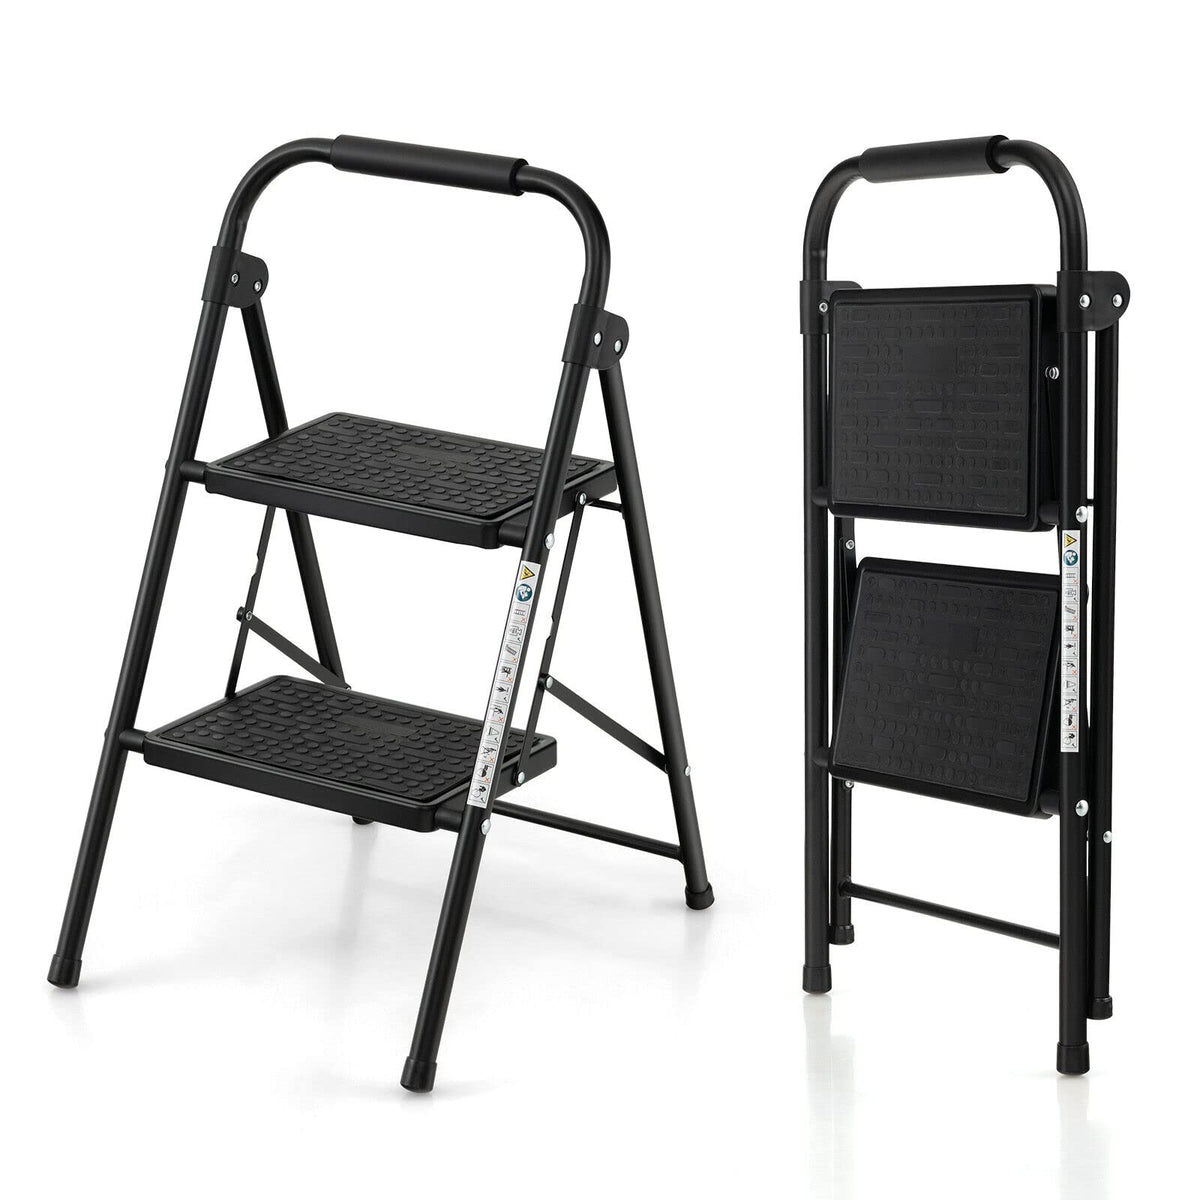 Goplus 2 Step Ladder, Folding Step Stool with Extra Wide and Anti-Slip Pedals